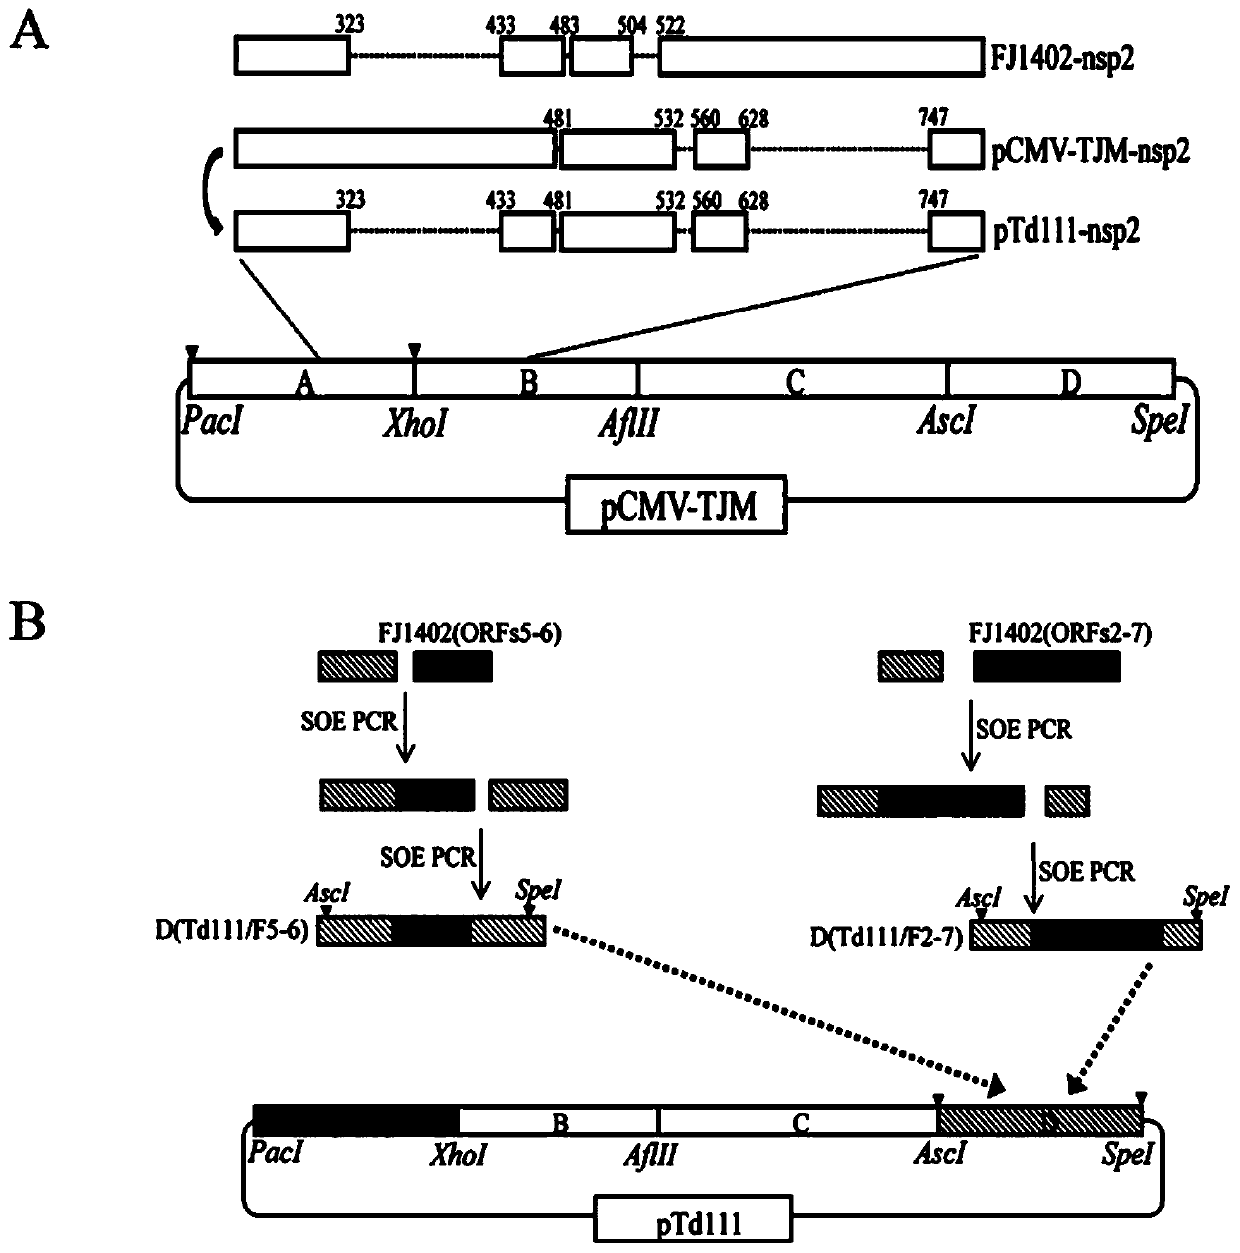 Chimeric strain of porcine reproductive and respiratory syndrome virus and application thereof